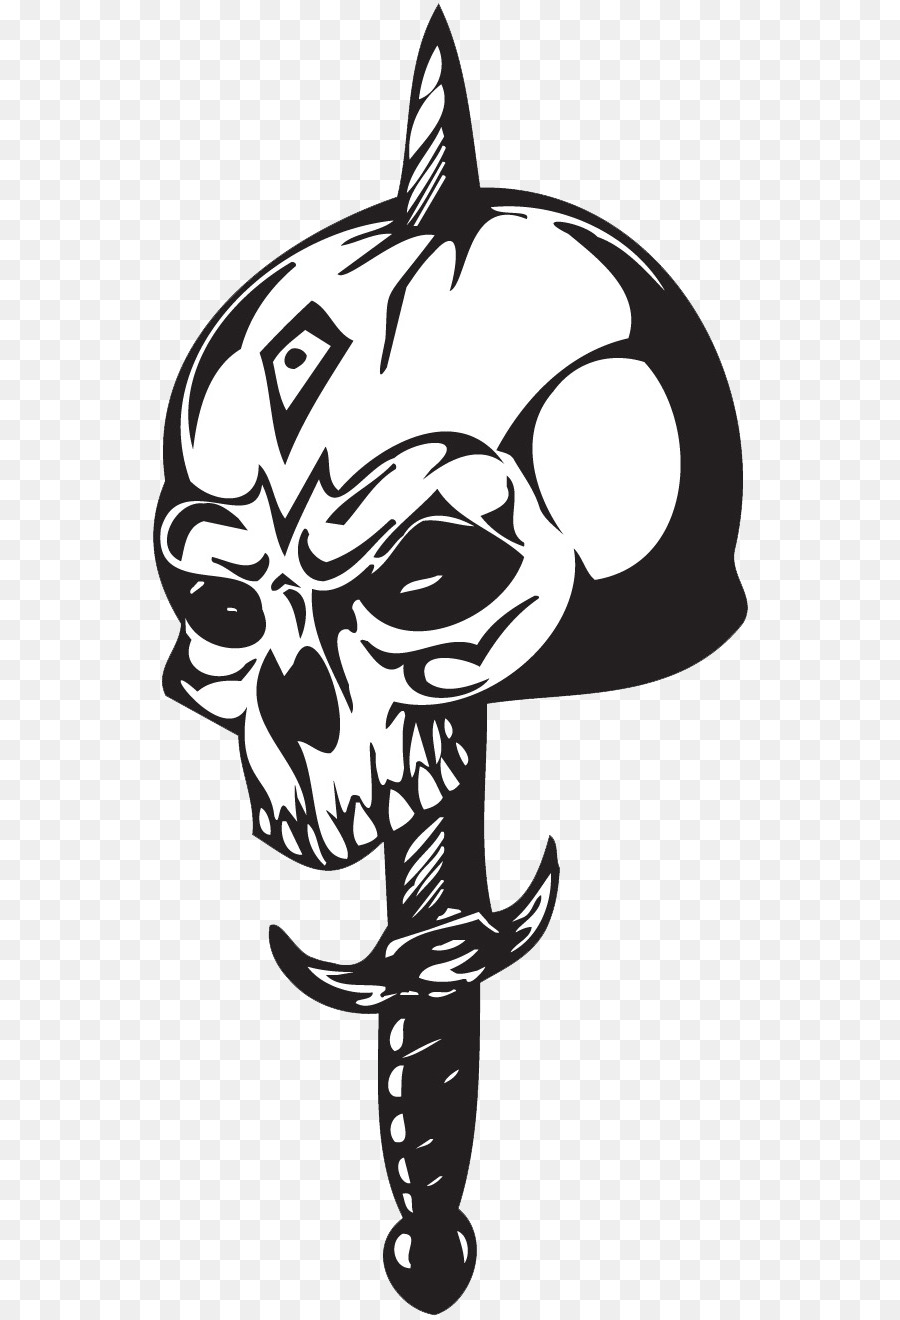 Styxx Sword of Darkness Dark-Hunter The League series Tattoo - Skull png download - 600*1318 - Free Transparent Darkhunter png Download.